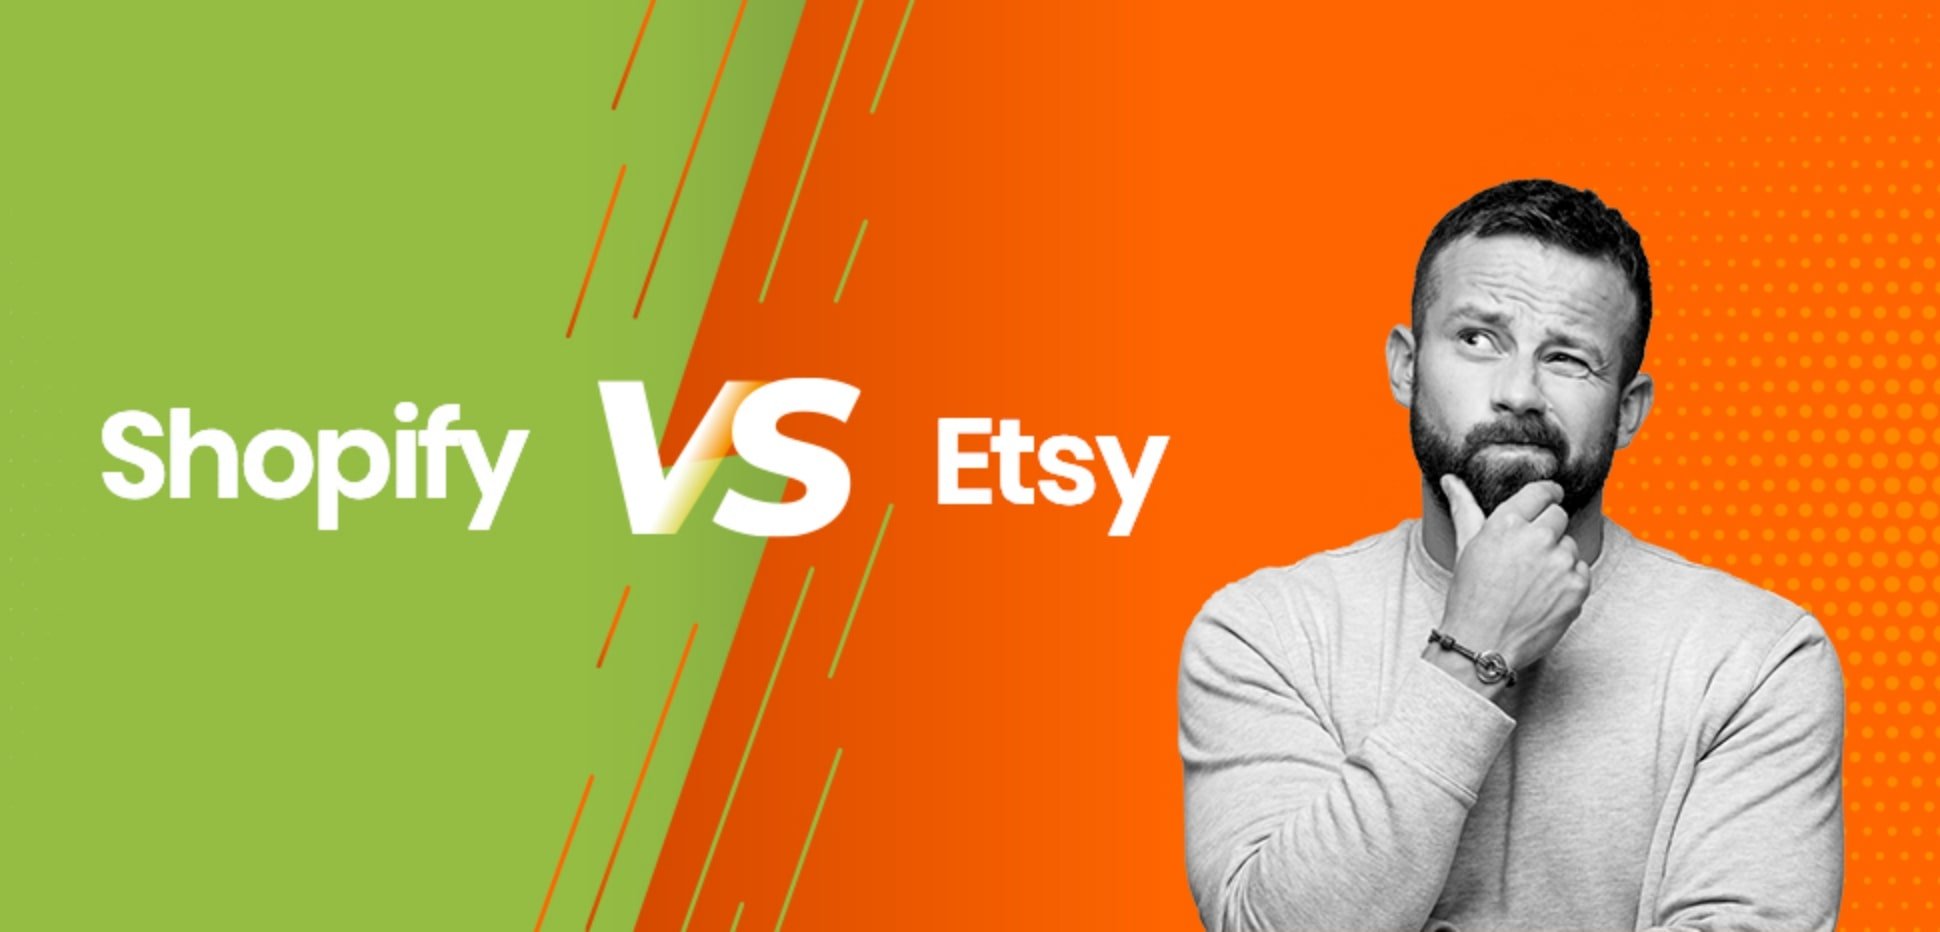 Shopify vs Etsy: Which is Best for Your Business?